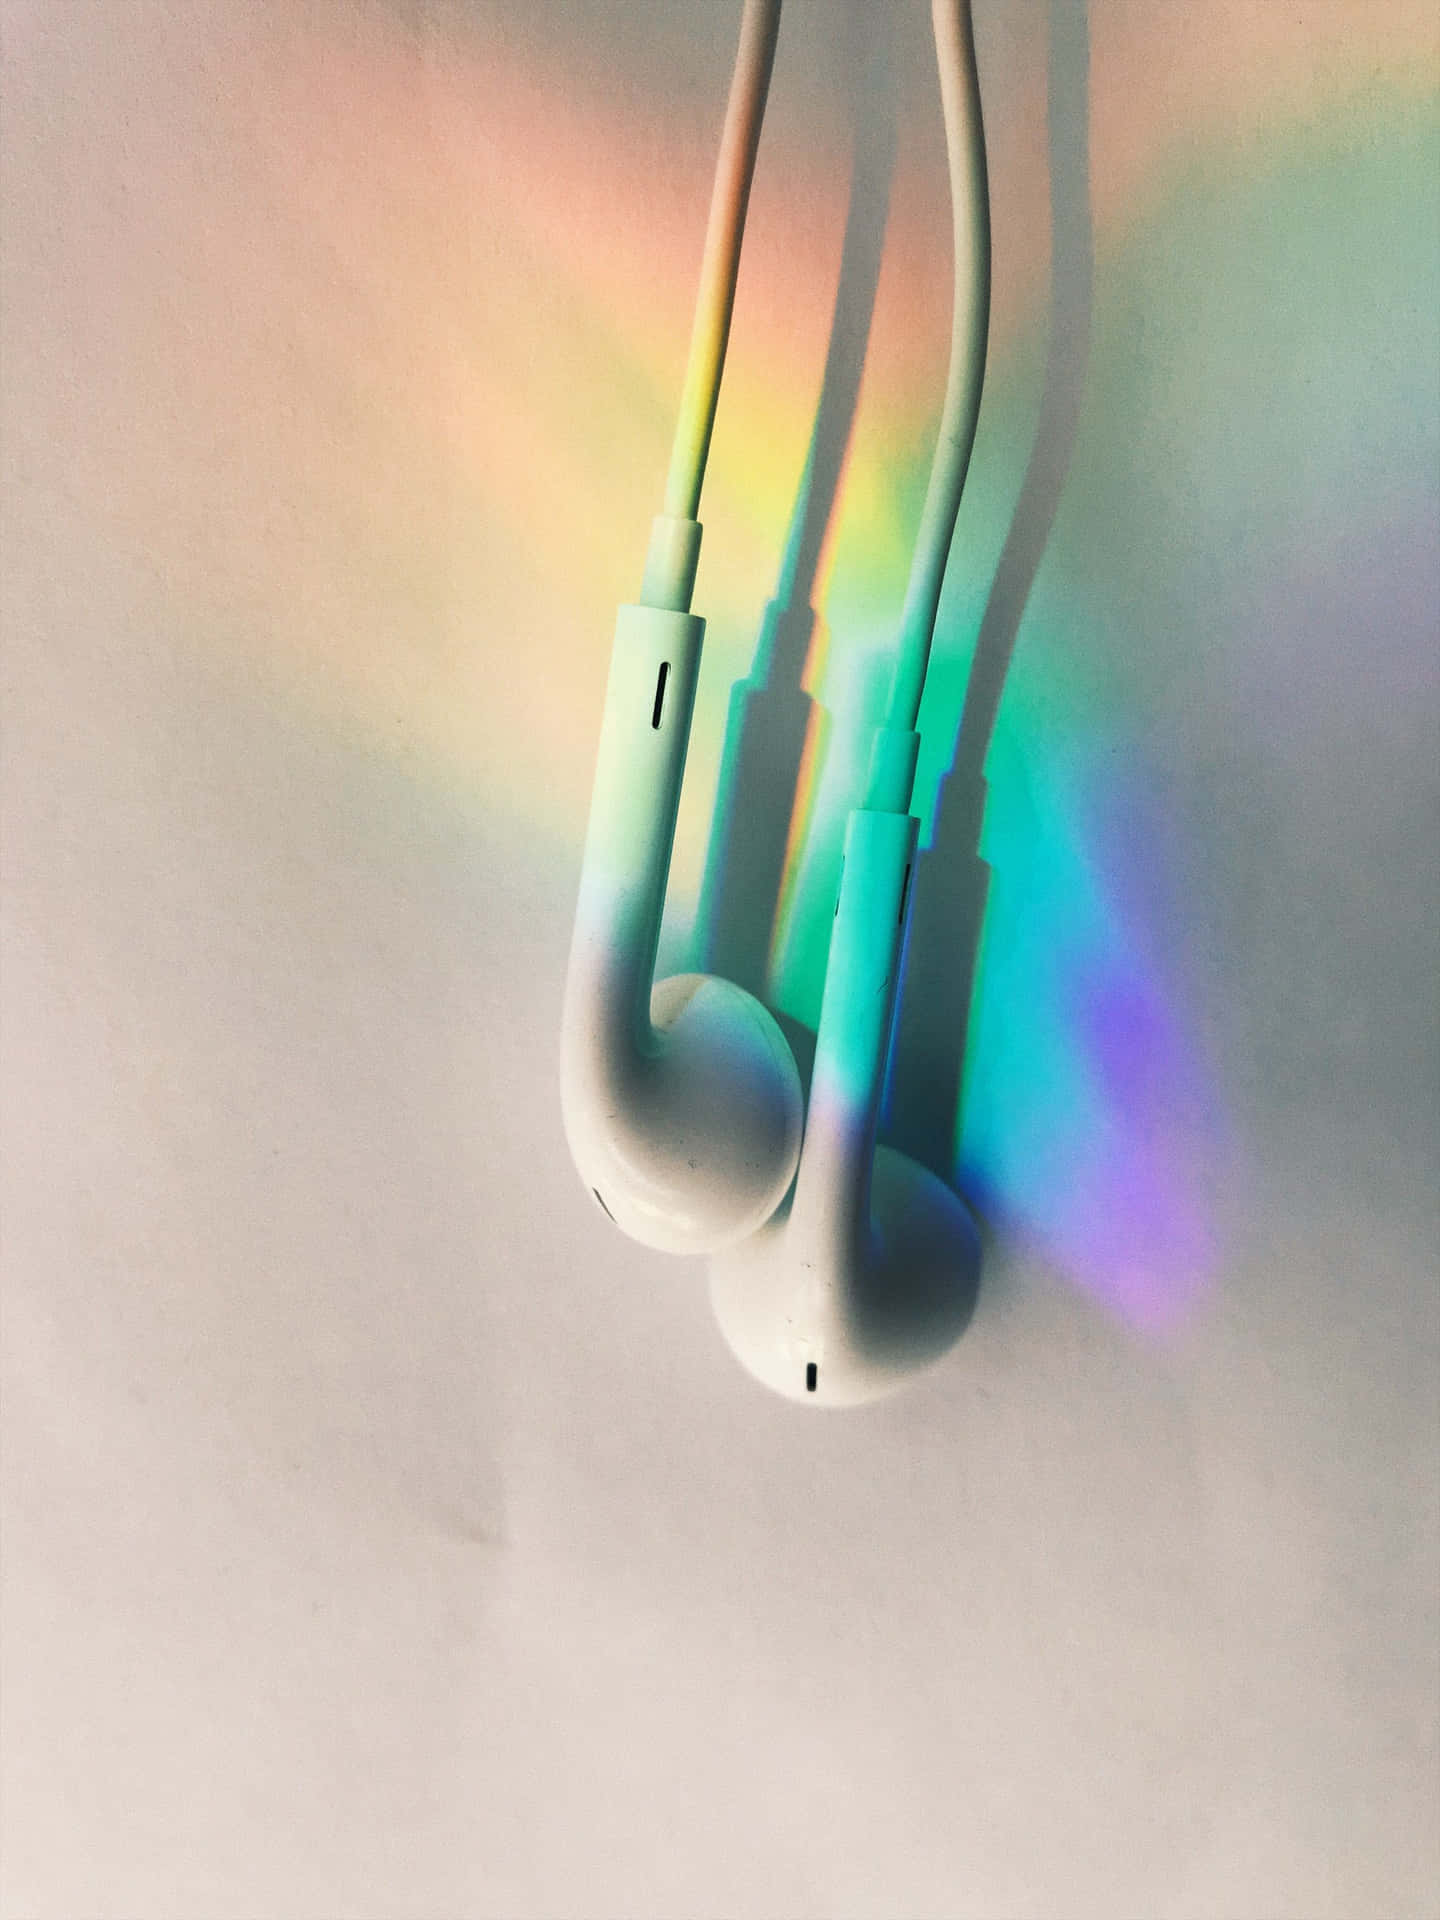 Enjoy gorgeous rainbow visuals while listening to your favorite tunes with Aesthetic Music.